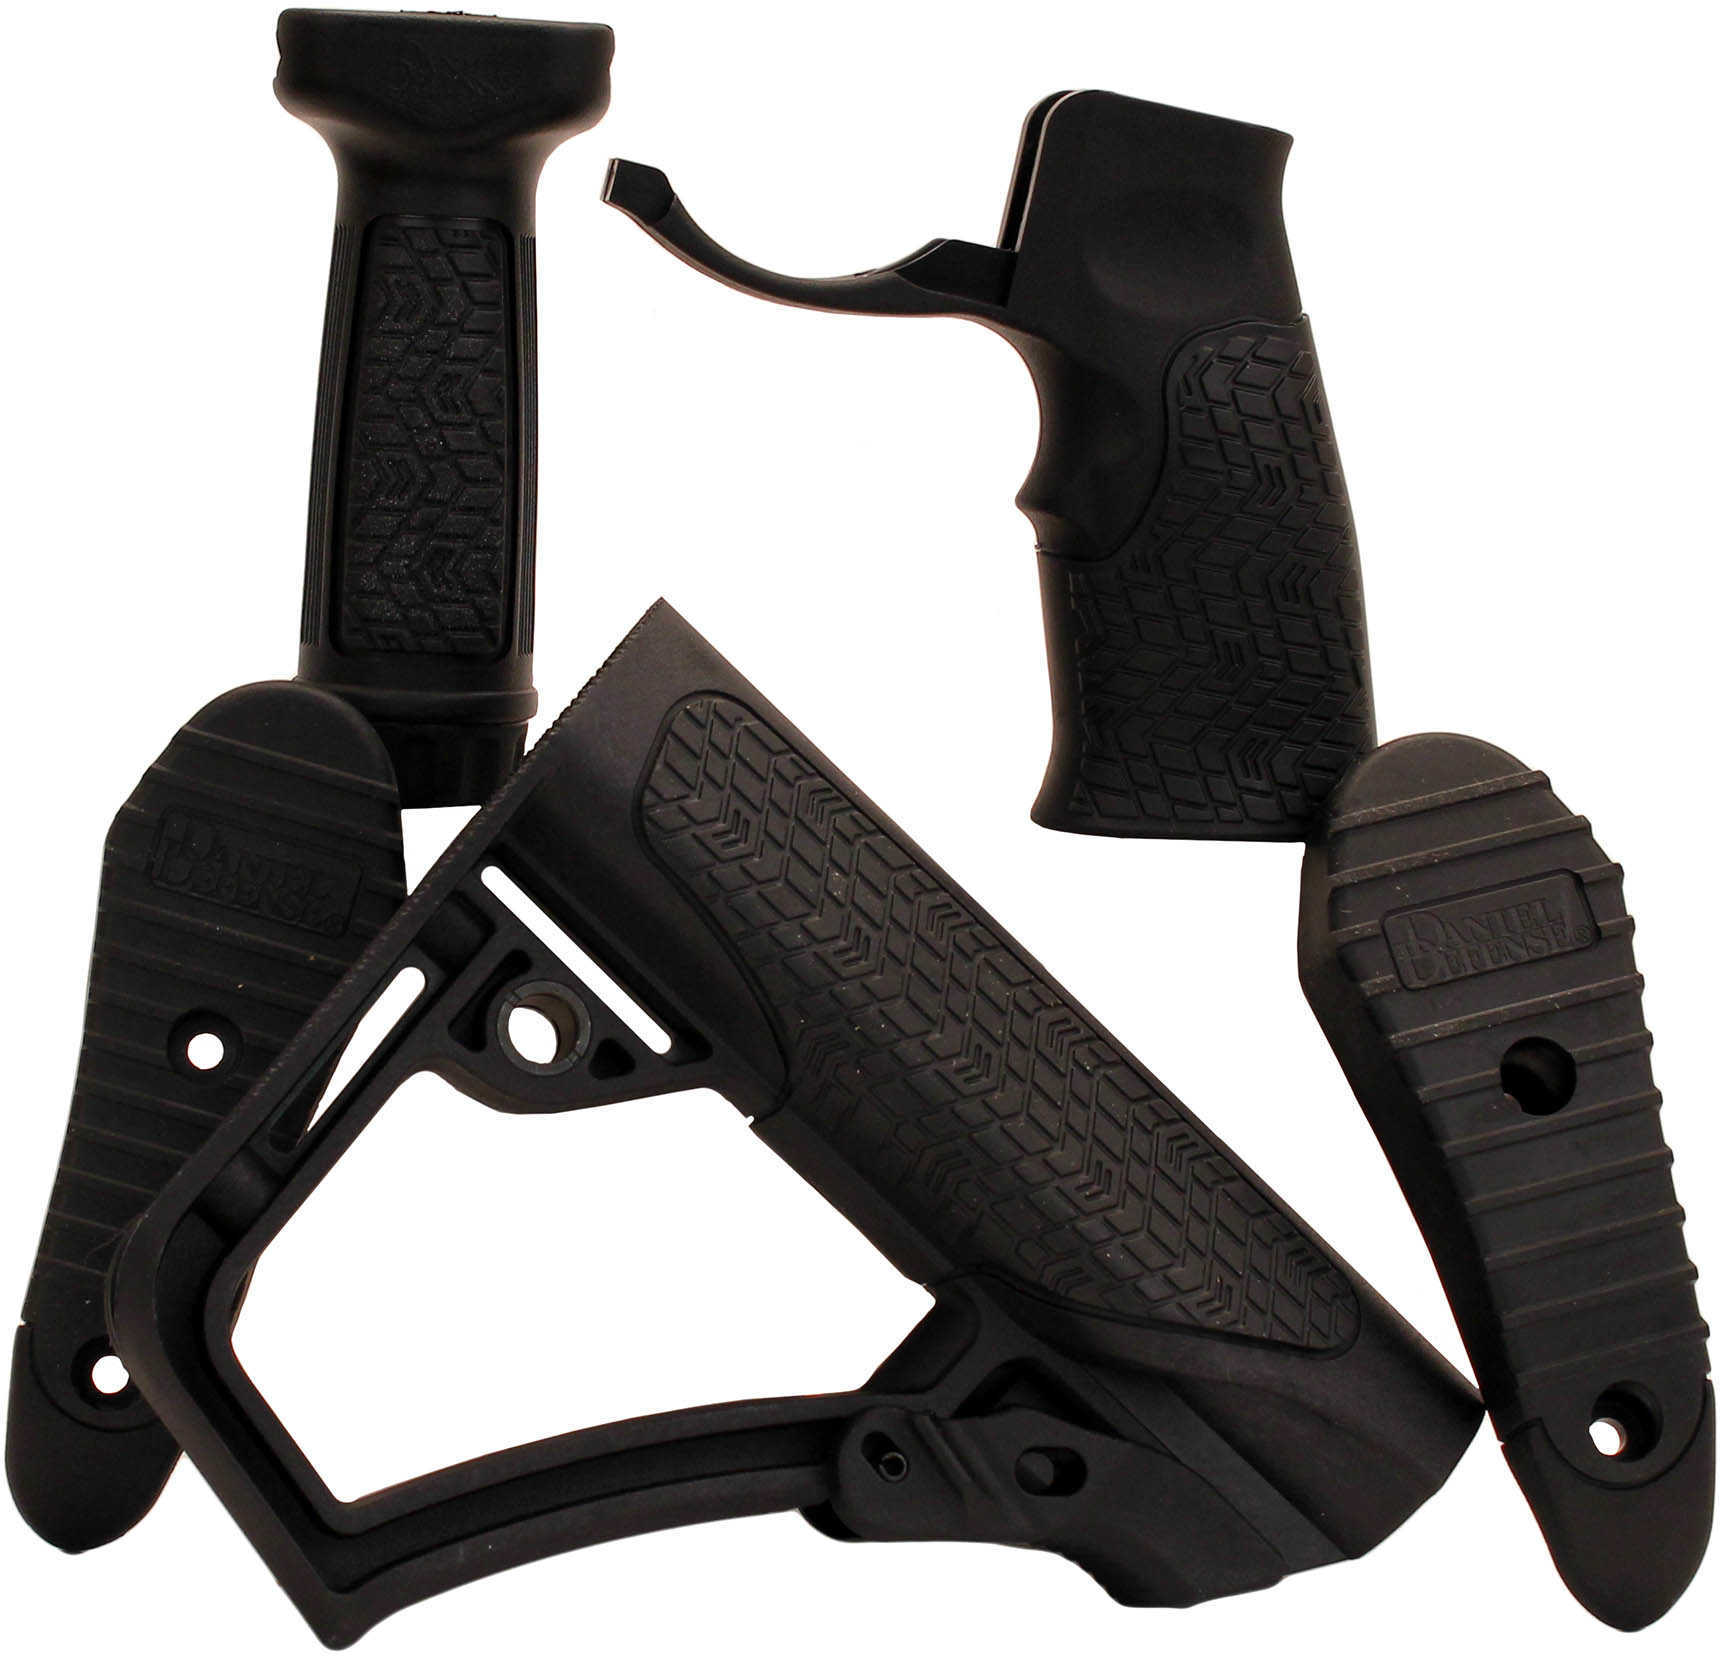 Collapsible Buttstock Pistol Grip & Vertical Foregrip Combo Blk